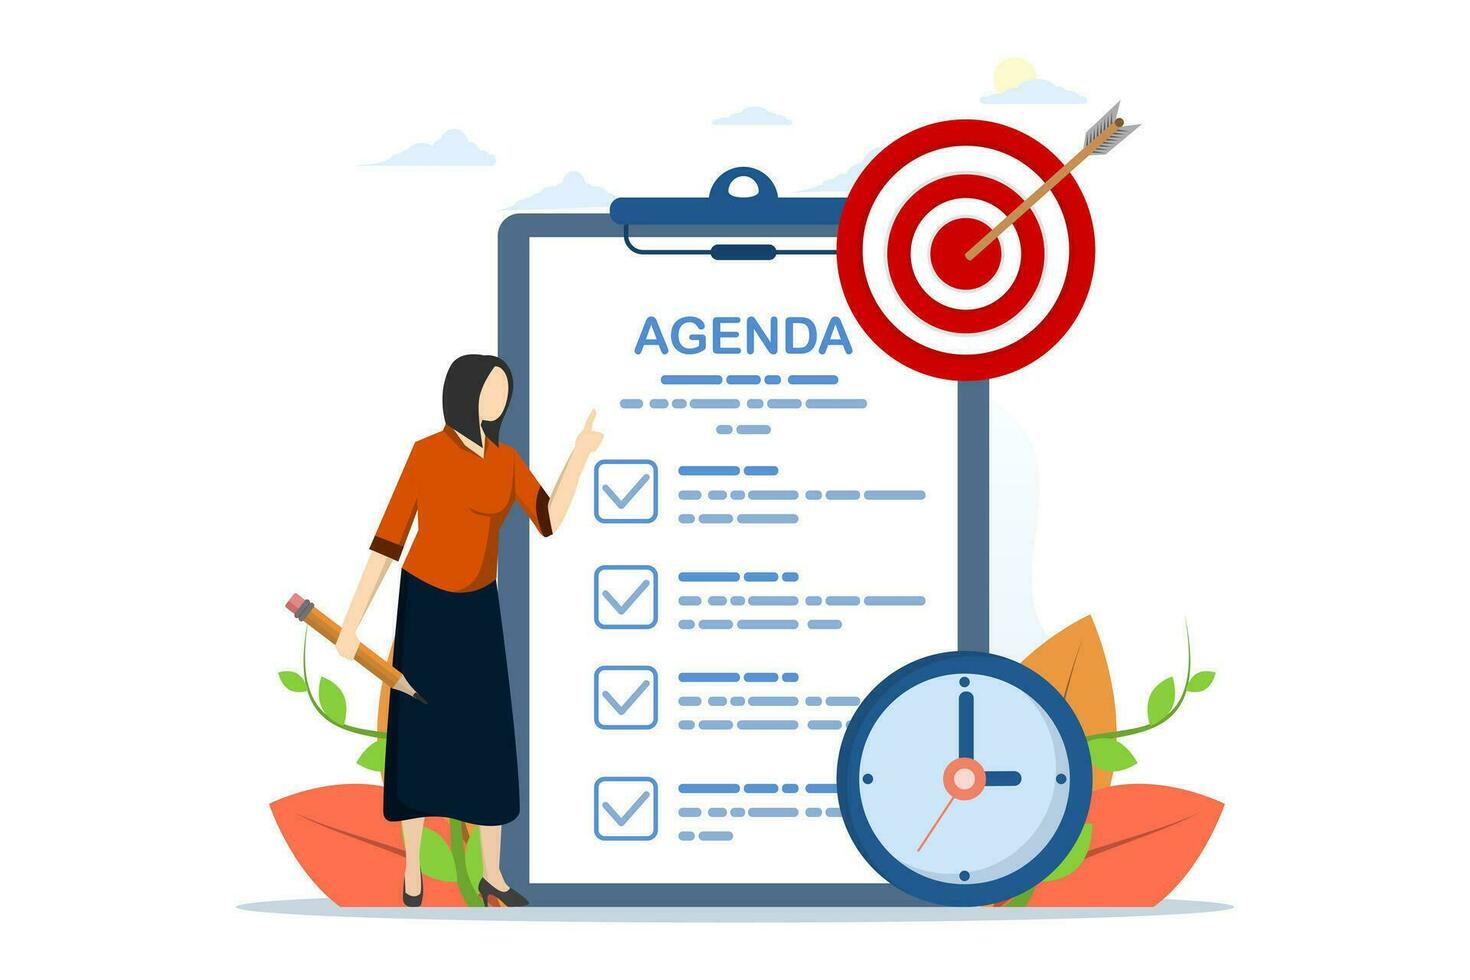 meeting agenda concept, priority of important tasks to discuss, goals to be completed, planner or checklist for office work, smart business woman holding meeting agenda writing pencil with clock. vector